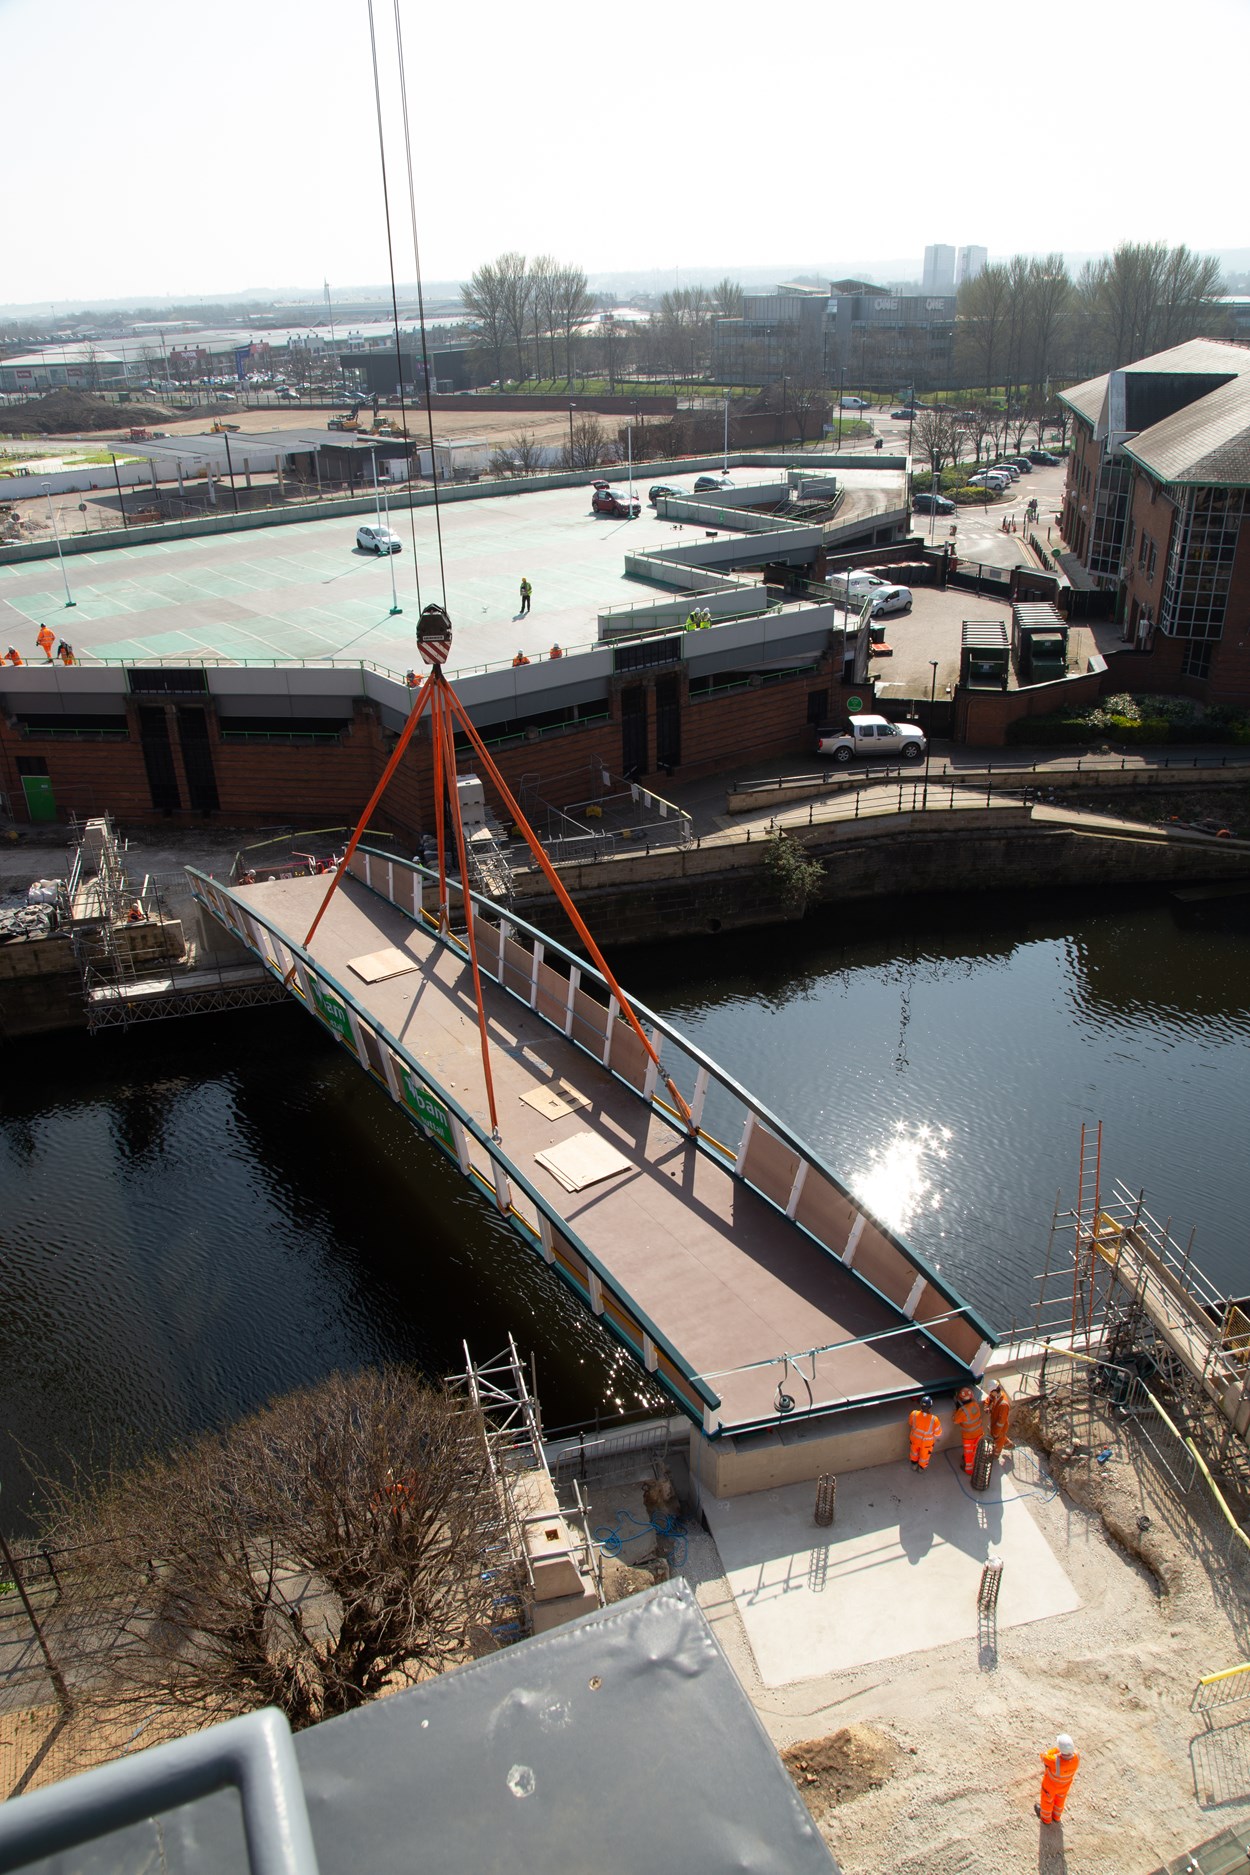 David Oluwale bridge installation: The David Oluwale bridge is lifted into place over the River Aire in Leeds. Engineers working on the David Oluwale bridge completed one of the project’s major milestones over the weekend, with cranes carefully placing the 40 tonne structure over the river where it will connect Sovereign Street to Water Lane. Credit BAM Nuttall.